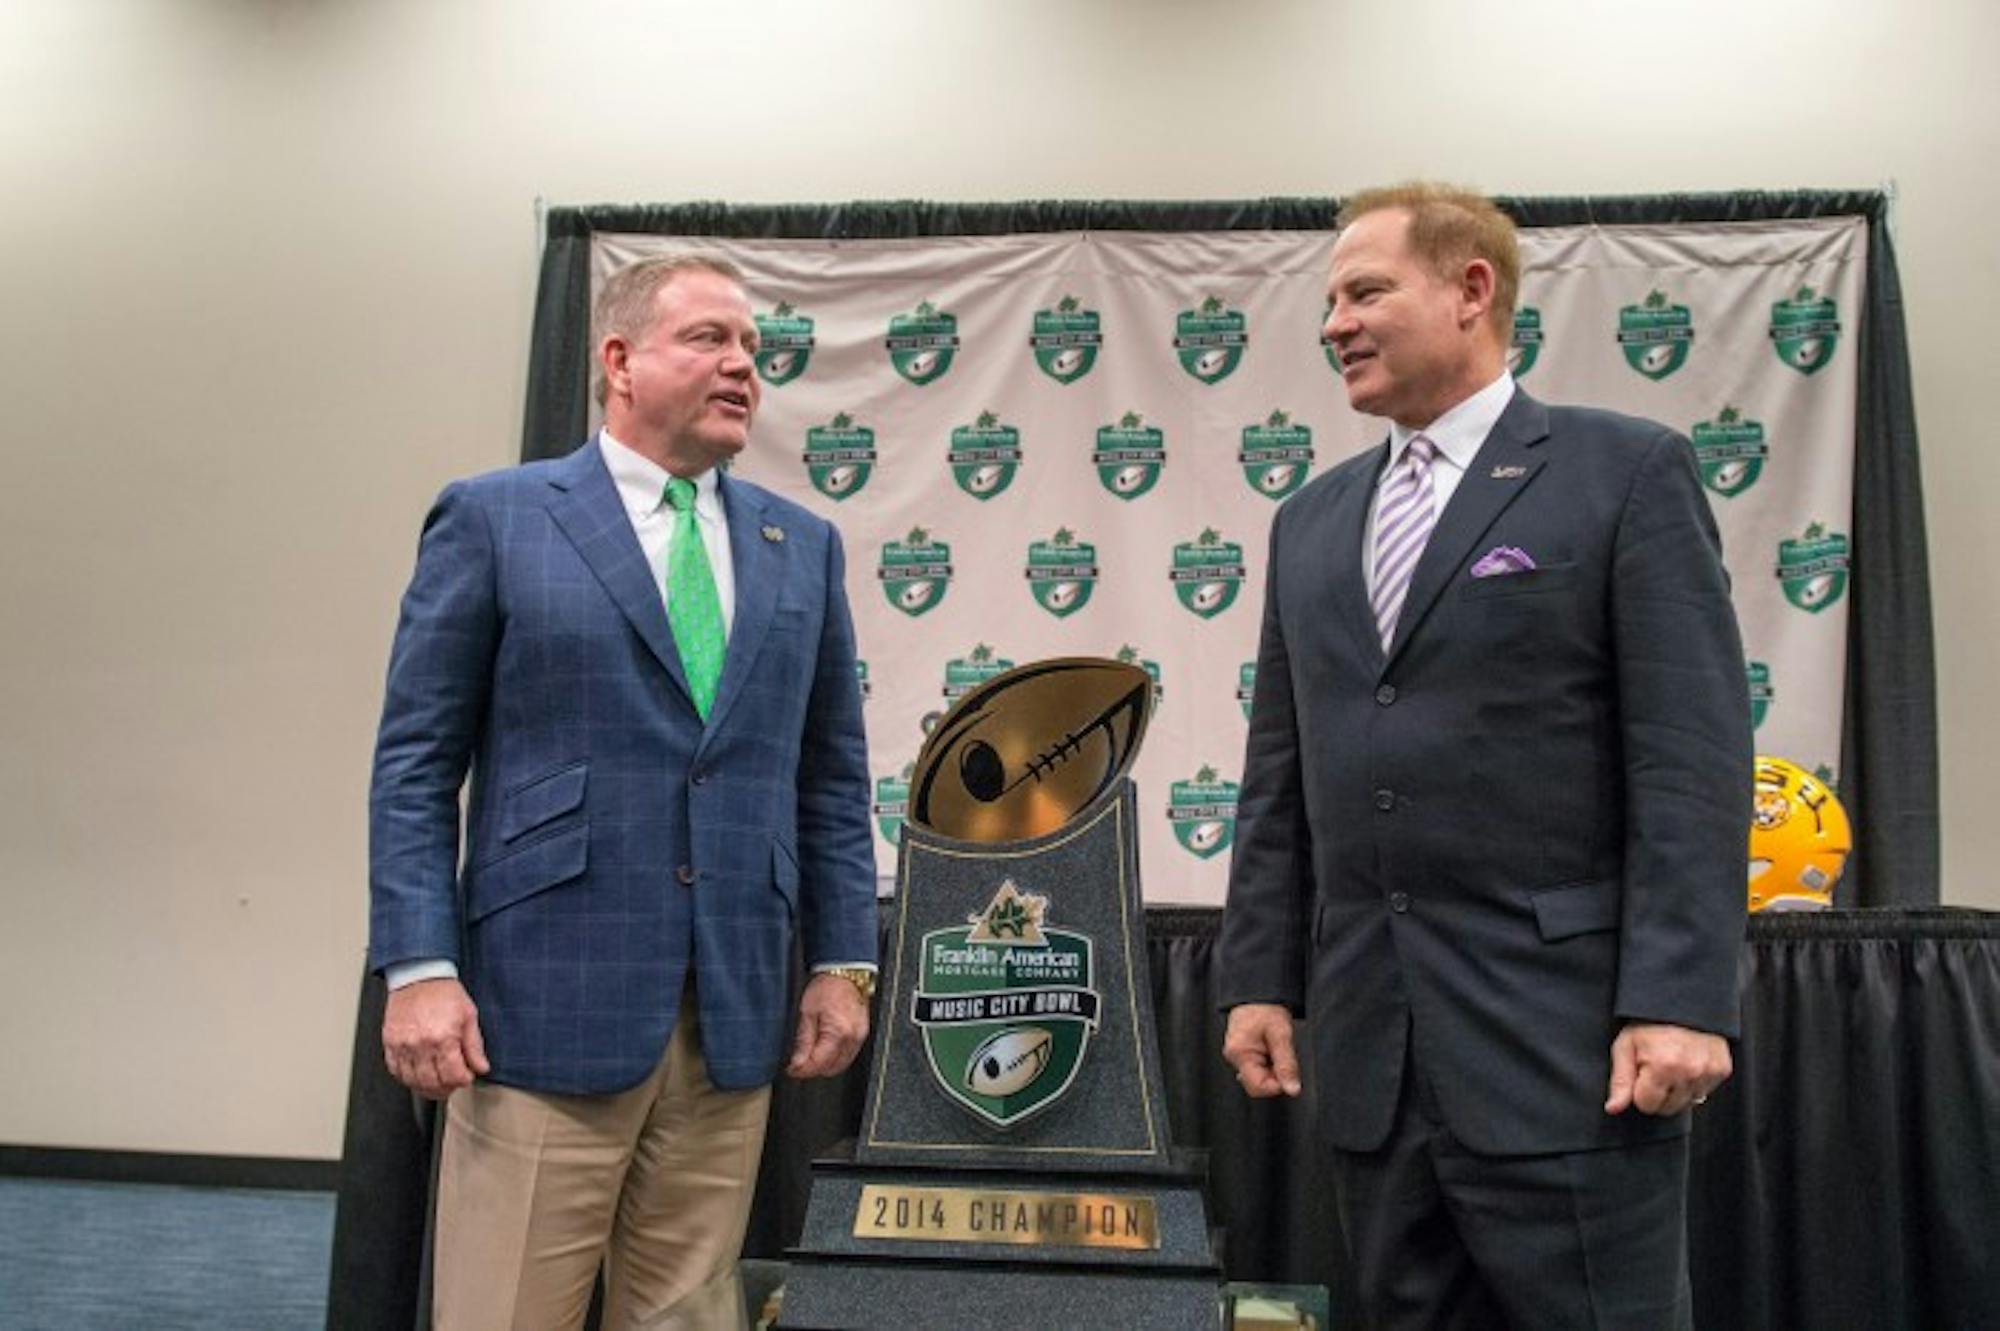 Notre Dame head coach Brian Kelly and LSU head coach Les Miles talk before a joint press conference Monday afternoon at LP Field in Nashville, Tennessee. Notre Dame and LSU will meet in The Franklin American Mortgage Music City Bowl on Tuesday afternoon.